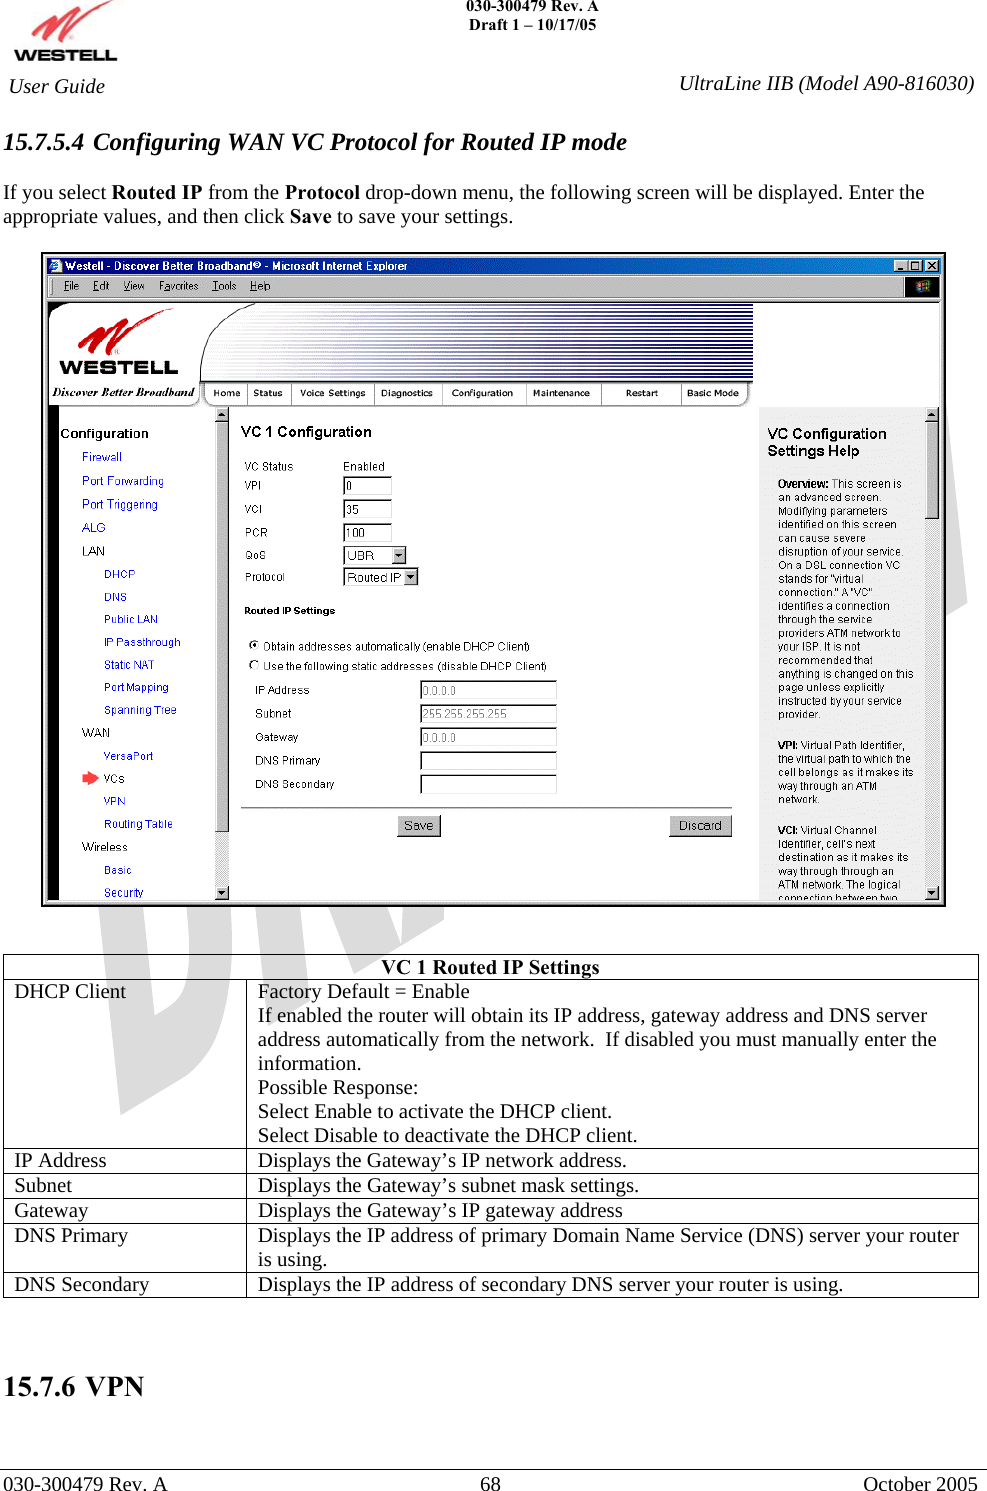    030-300479 Rev. A Draft 1 – 10/17/05   030-300479 Rev. A  68  October 2005  User Guide  UltraLine IIB (Model A90-816030)15.7.5.4 Configuring WAN VC Protocol for Routed IP mode  If you select Routed IP from the Protocol drop-down menu, the following screen will be displayed. Enter the appropriate values, and then click Save to save your settings.     VC 1 Routed IP Settings DHCP Client  Factory Default = Enable If enabled the router will obtain its IP address, gateway address and DNS server address automatically from the network.  If disabled you must manually enter the information. Possible Response: Select Enable to activate the DHCP client. Select Disable to deactivate the DHCP client. IP Address  Displays the Gateway’s IP network address. Subnet  Displays the Gateway’s subnet mask settings. Gateway  Displays the Gateway’s IP gateway address DNS Primary  Displays the IP address of primary Domain Name Service (DNS) server your router is using. DNS Secondary  Displays the IP address of secondary DNS server your router is using.    15.7.6   VPN  